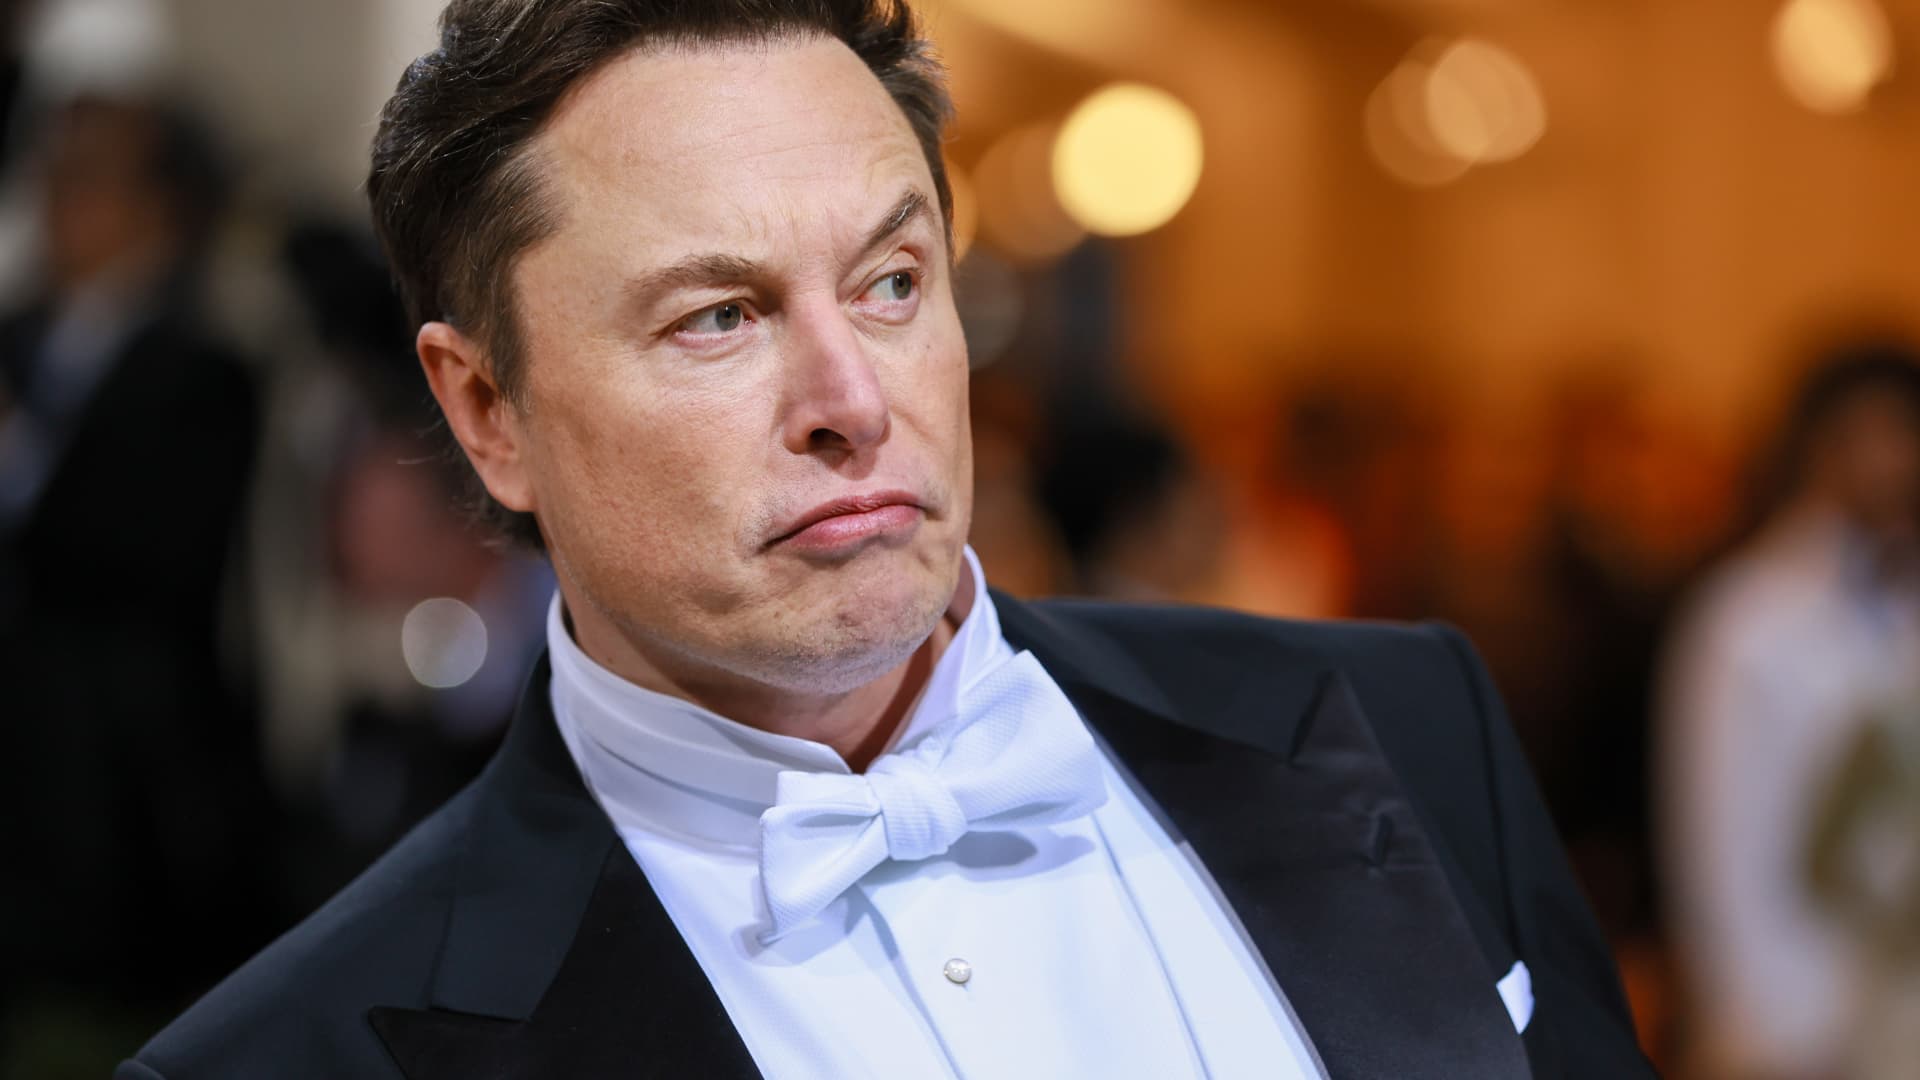 Elon Musk says it’s time for Trump to ‘sail into the sunset’